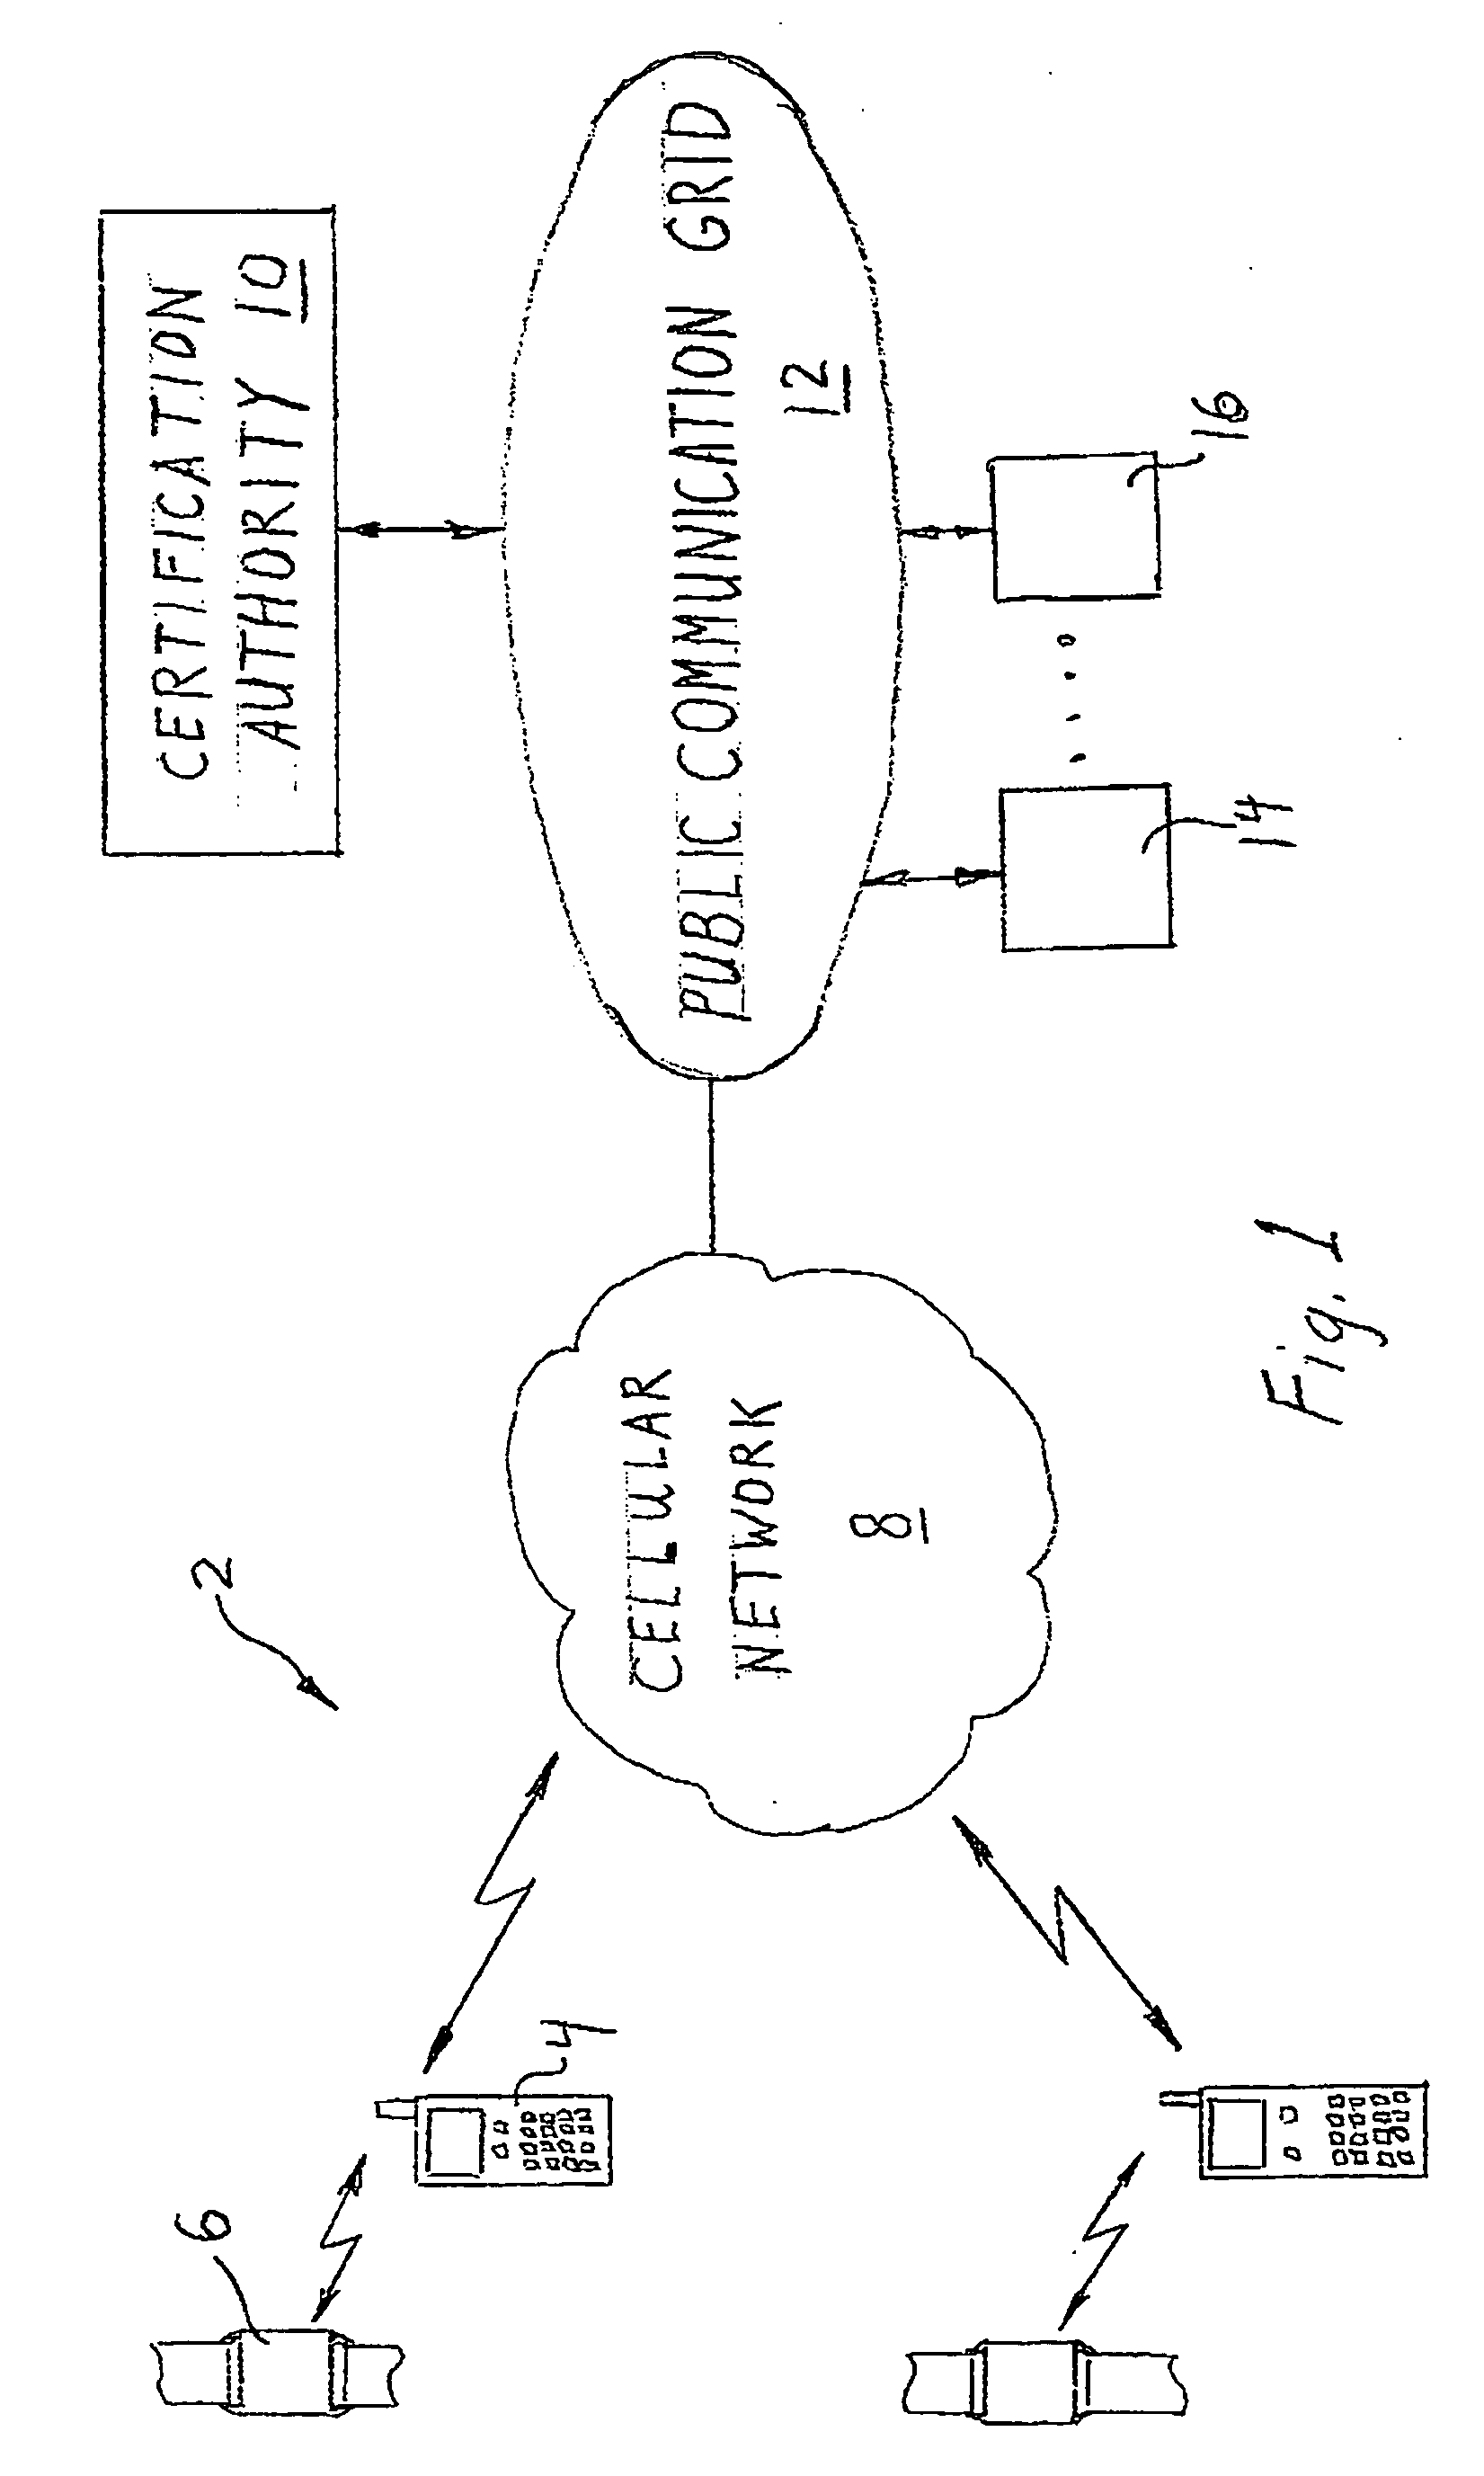 Security system for handheld wireless devices using-time variable encryption keys